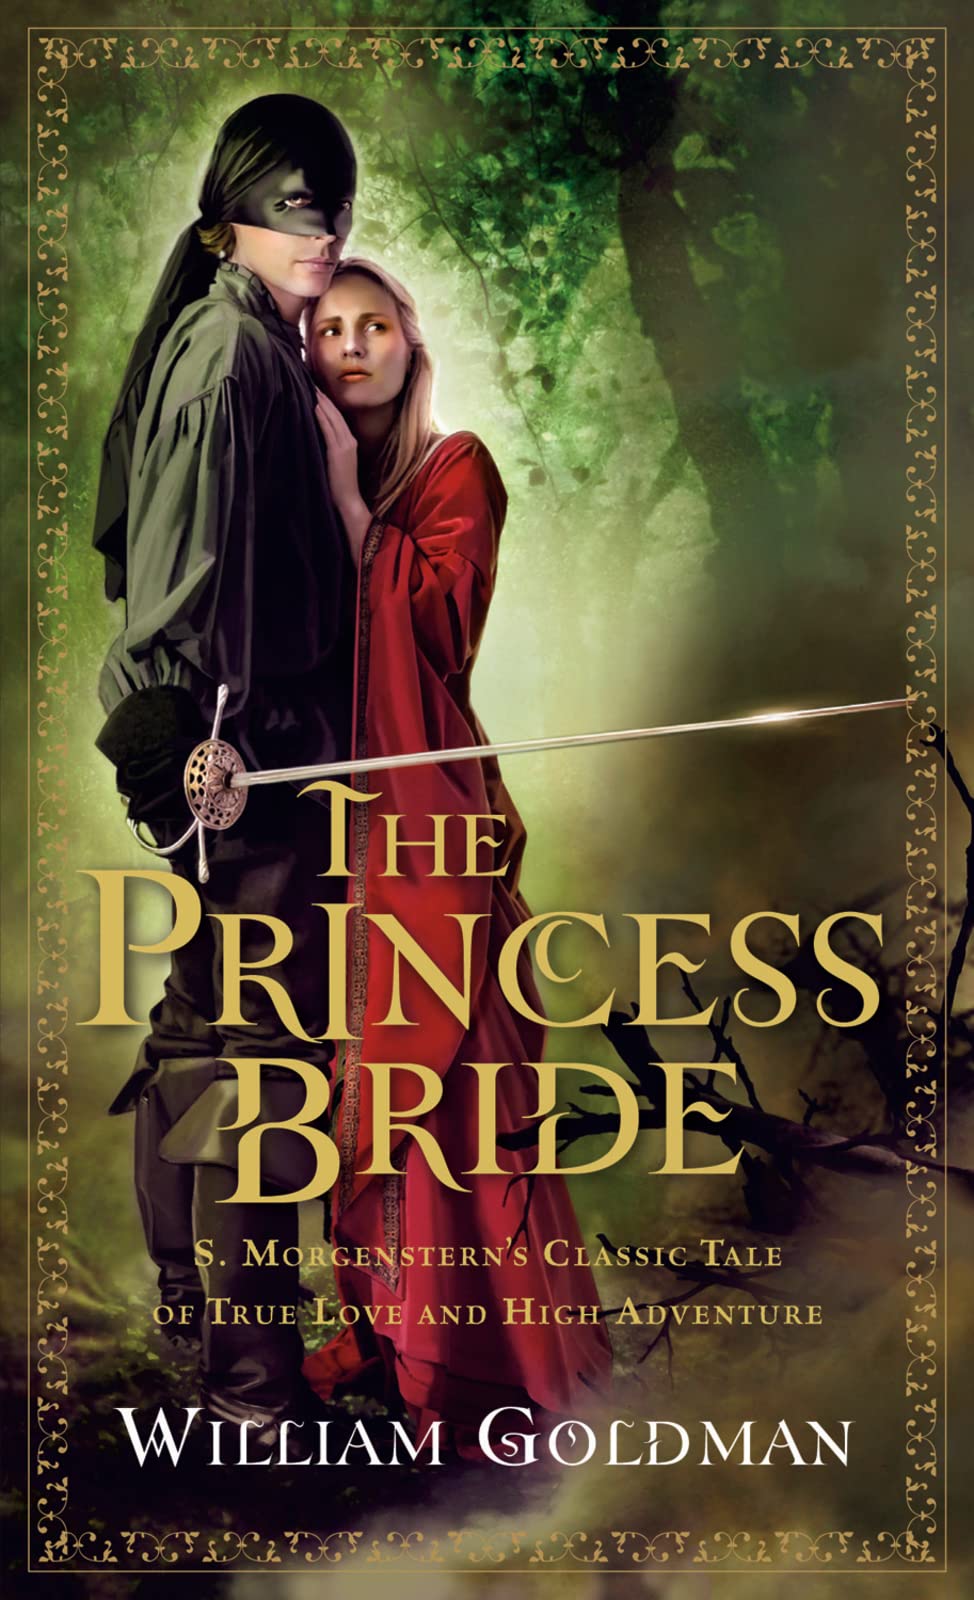 Cover Image for "The Princess Bride"